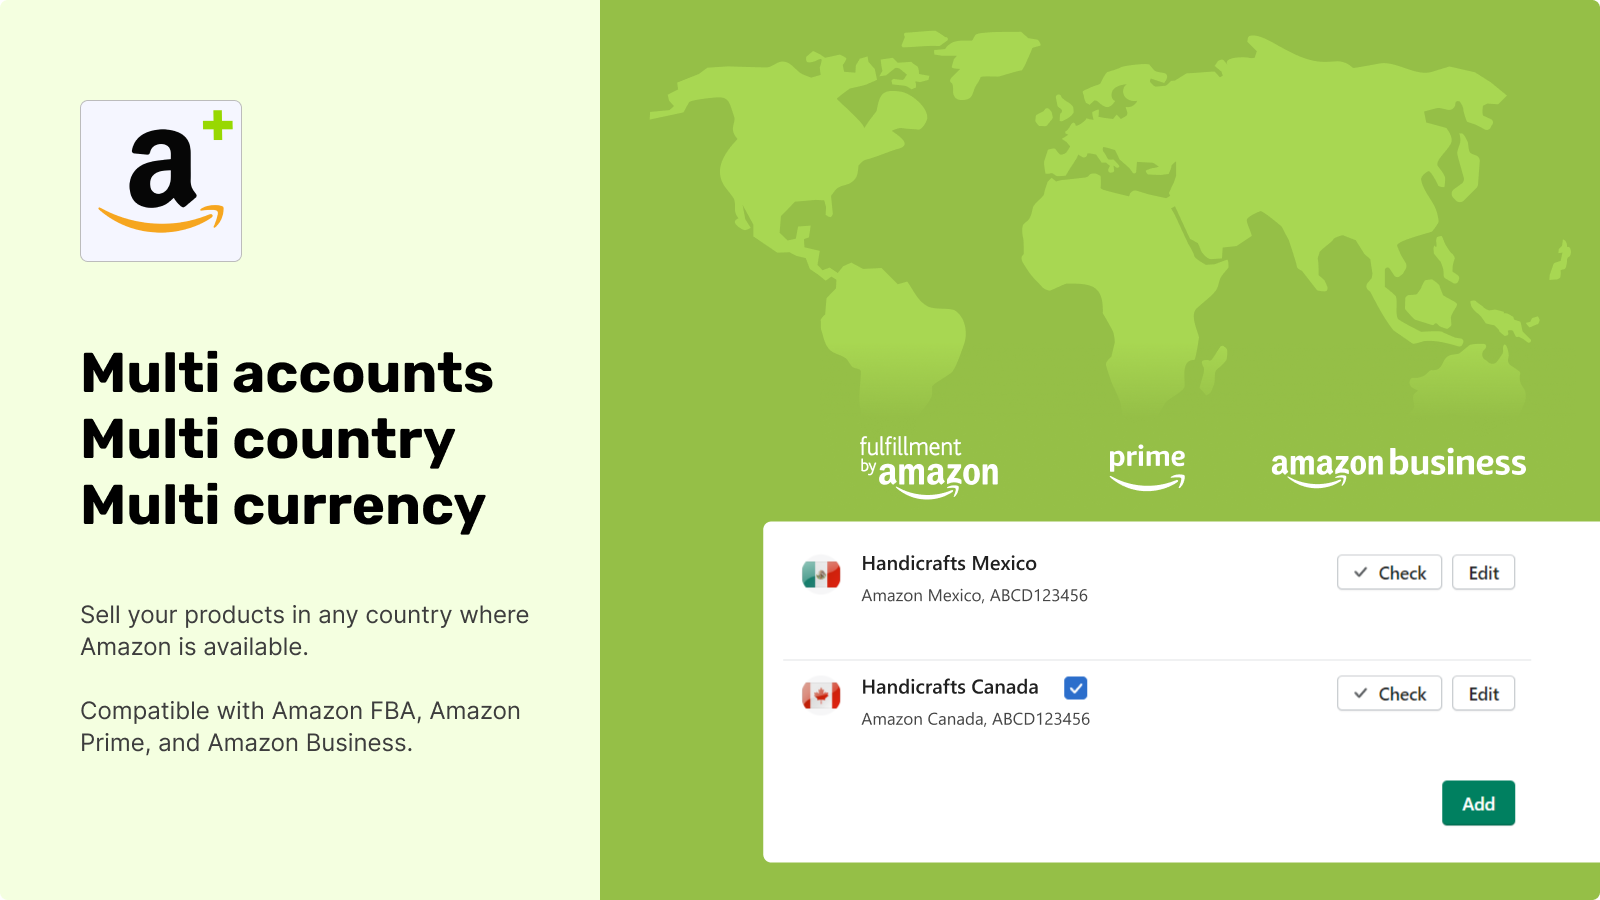 multi accounts, multi country, multi currency